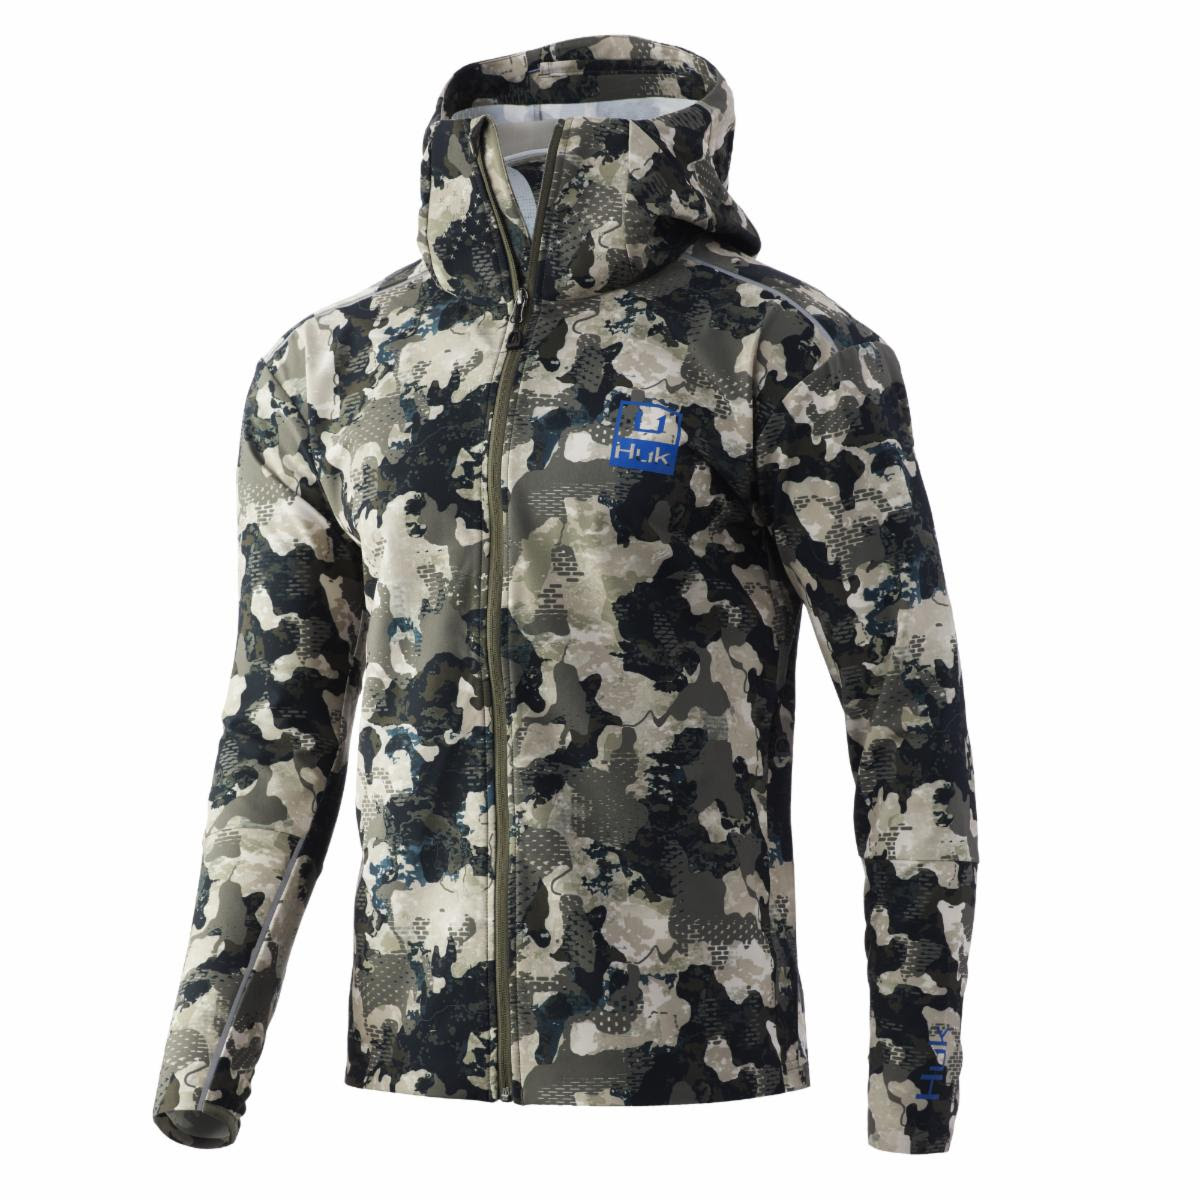  HUK Men's Standard ICON X Superior Water & Wind Proof